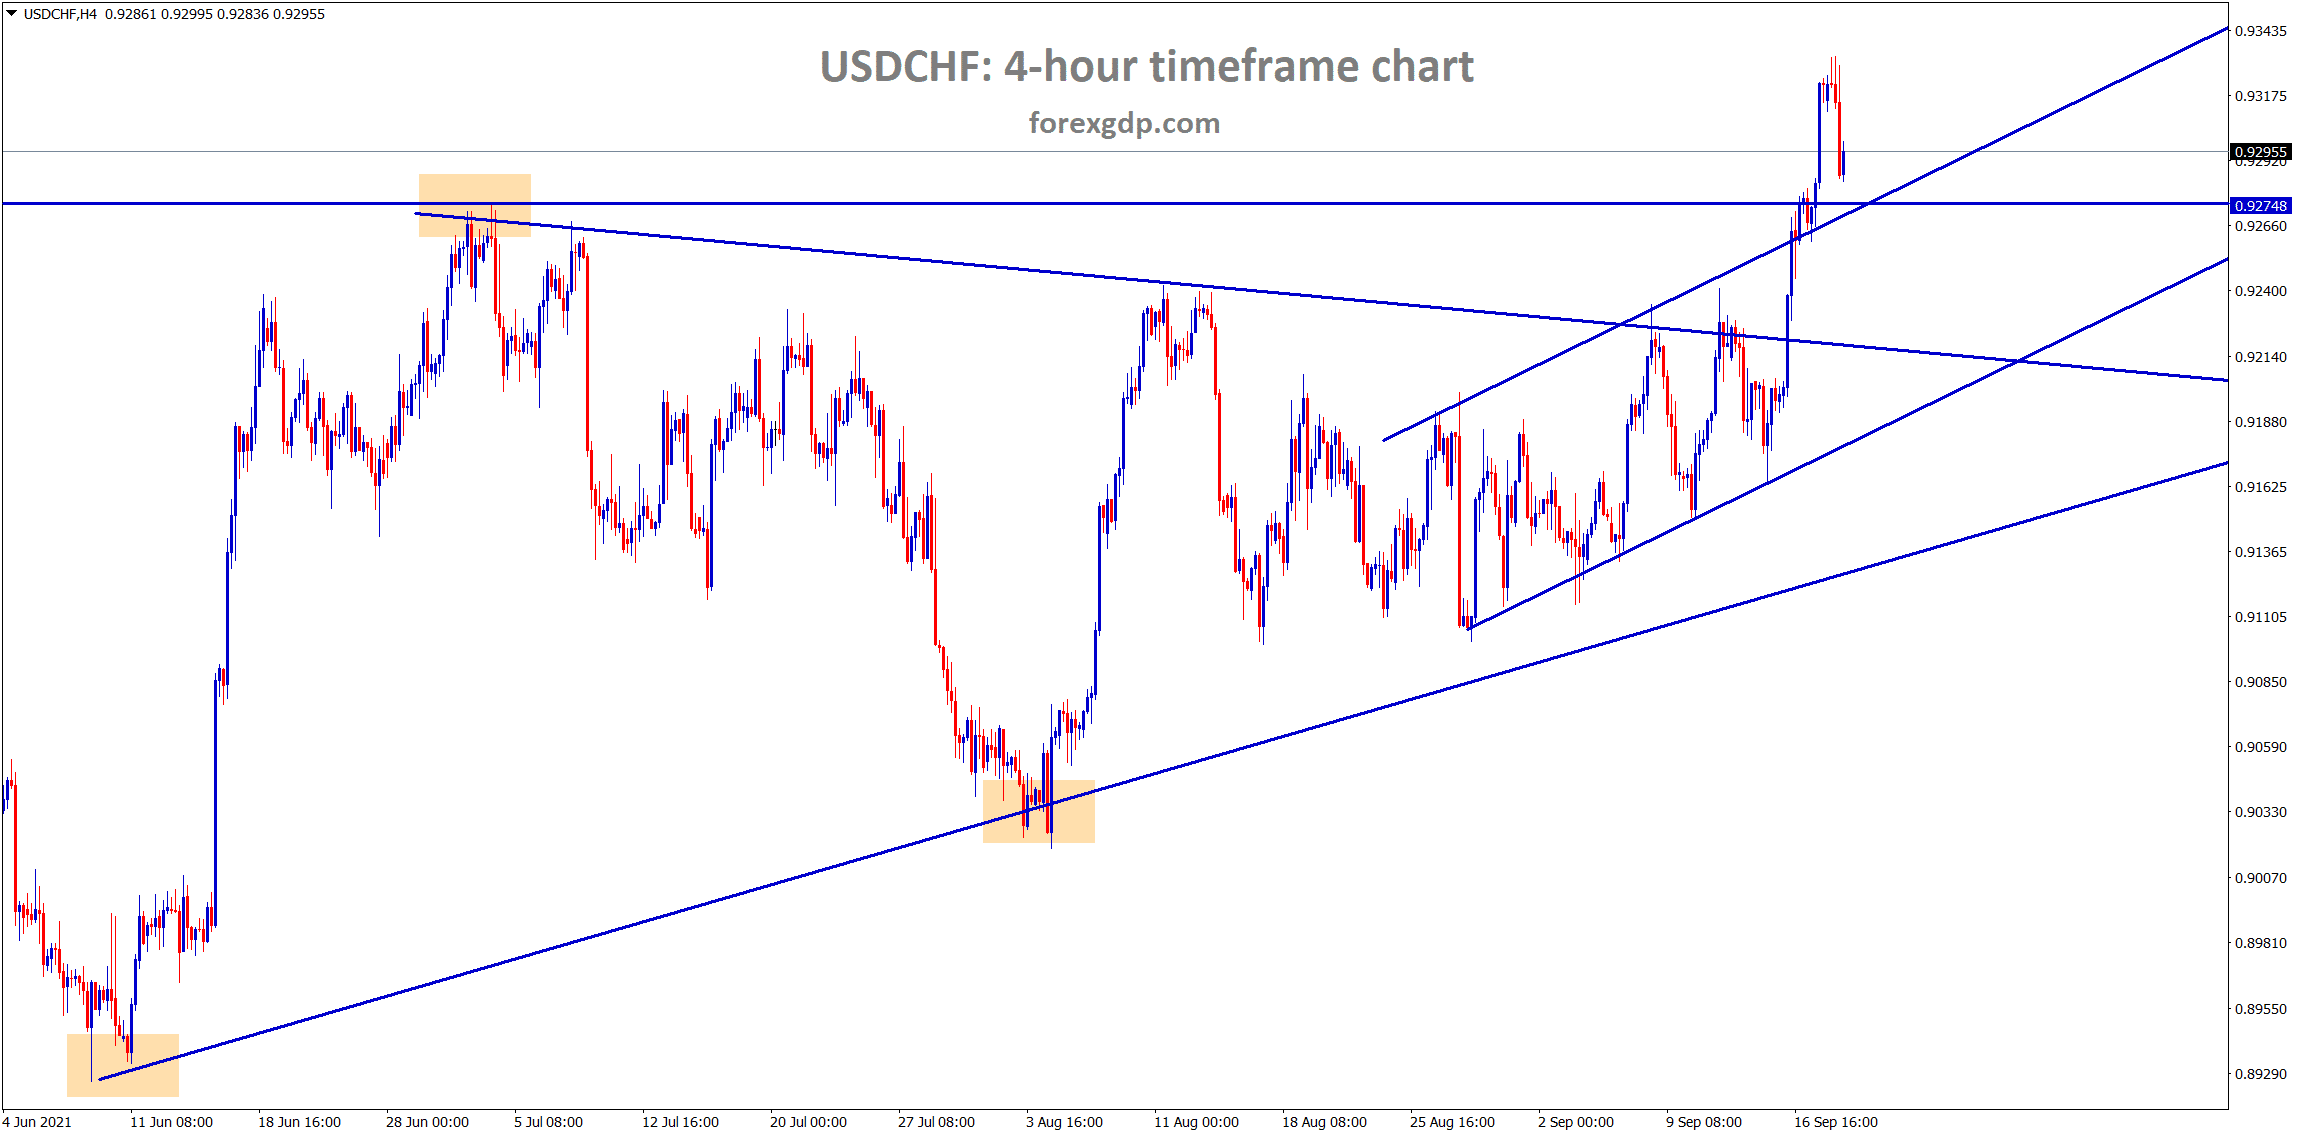 USDCHF has fallen back to the retest area of the horizontal resistance